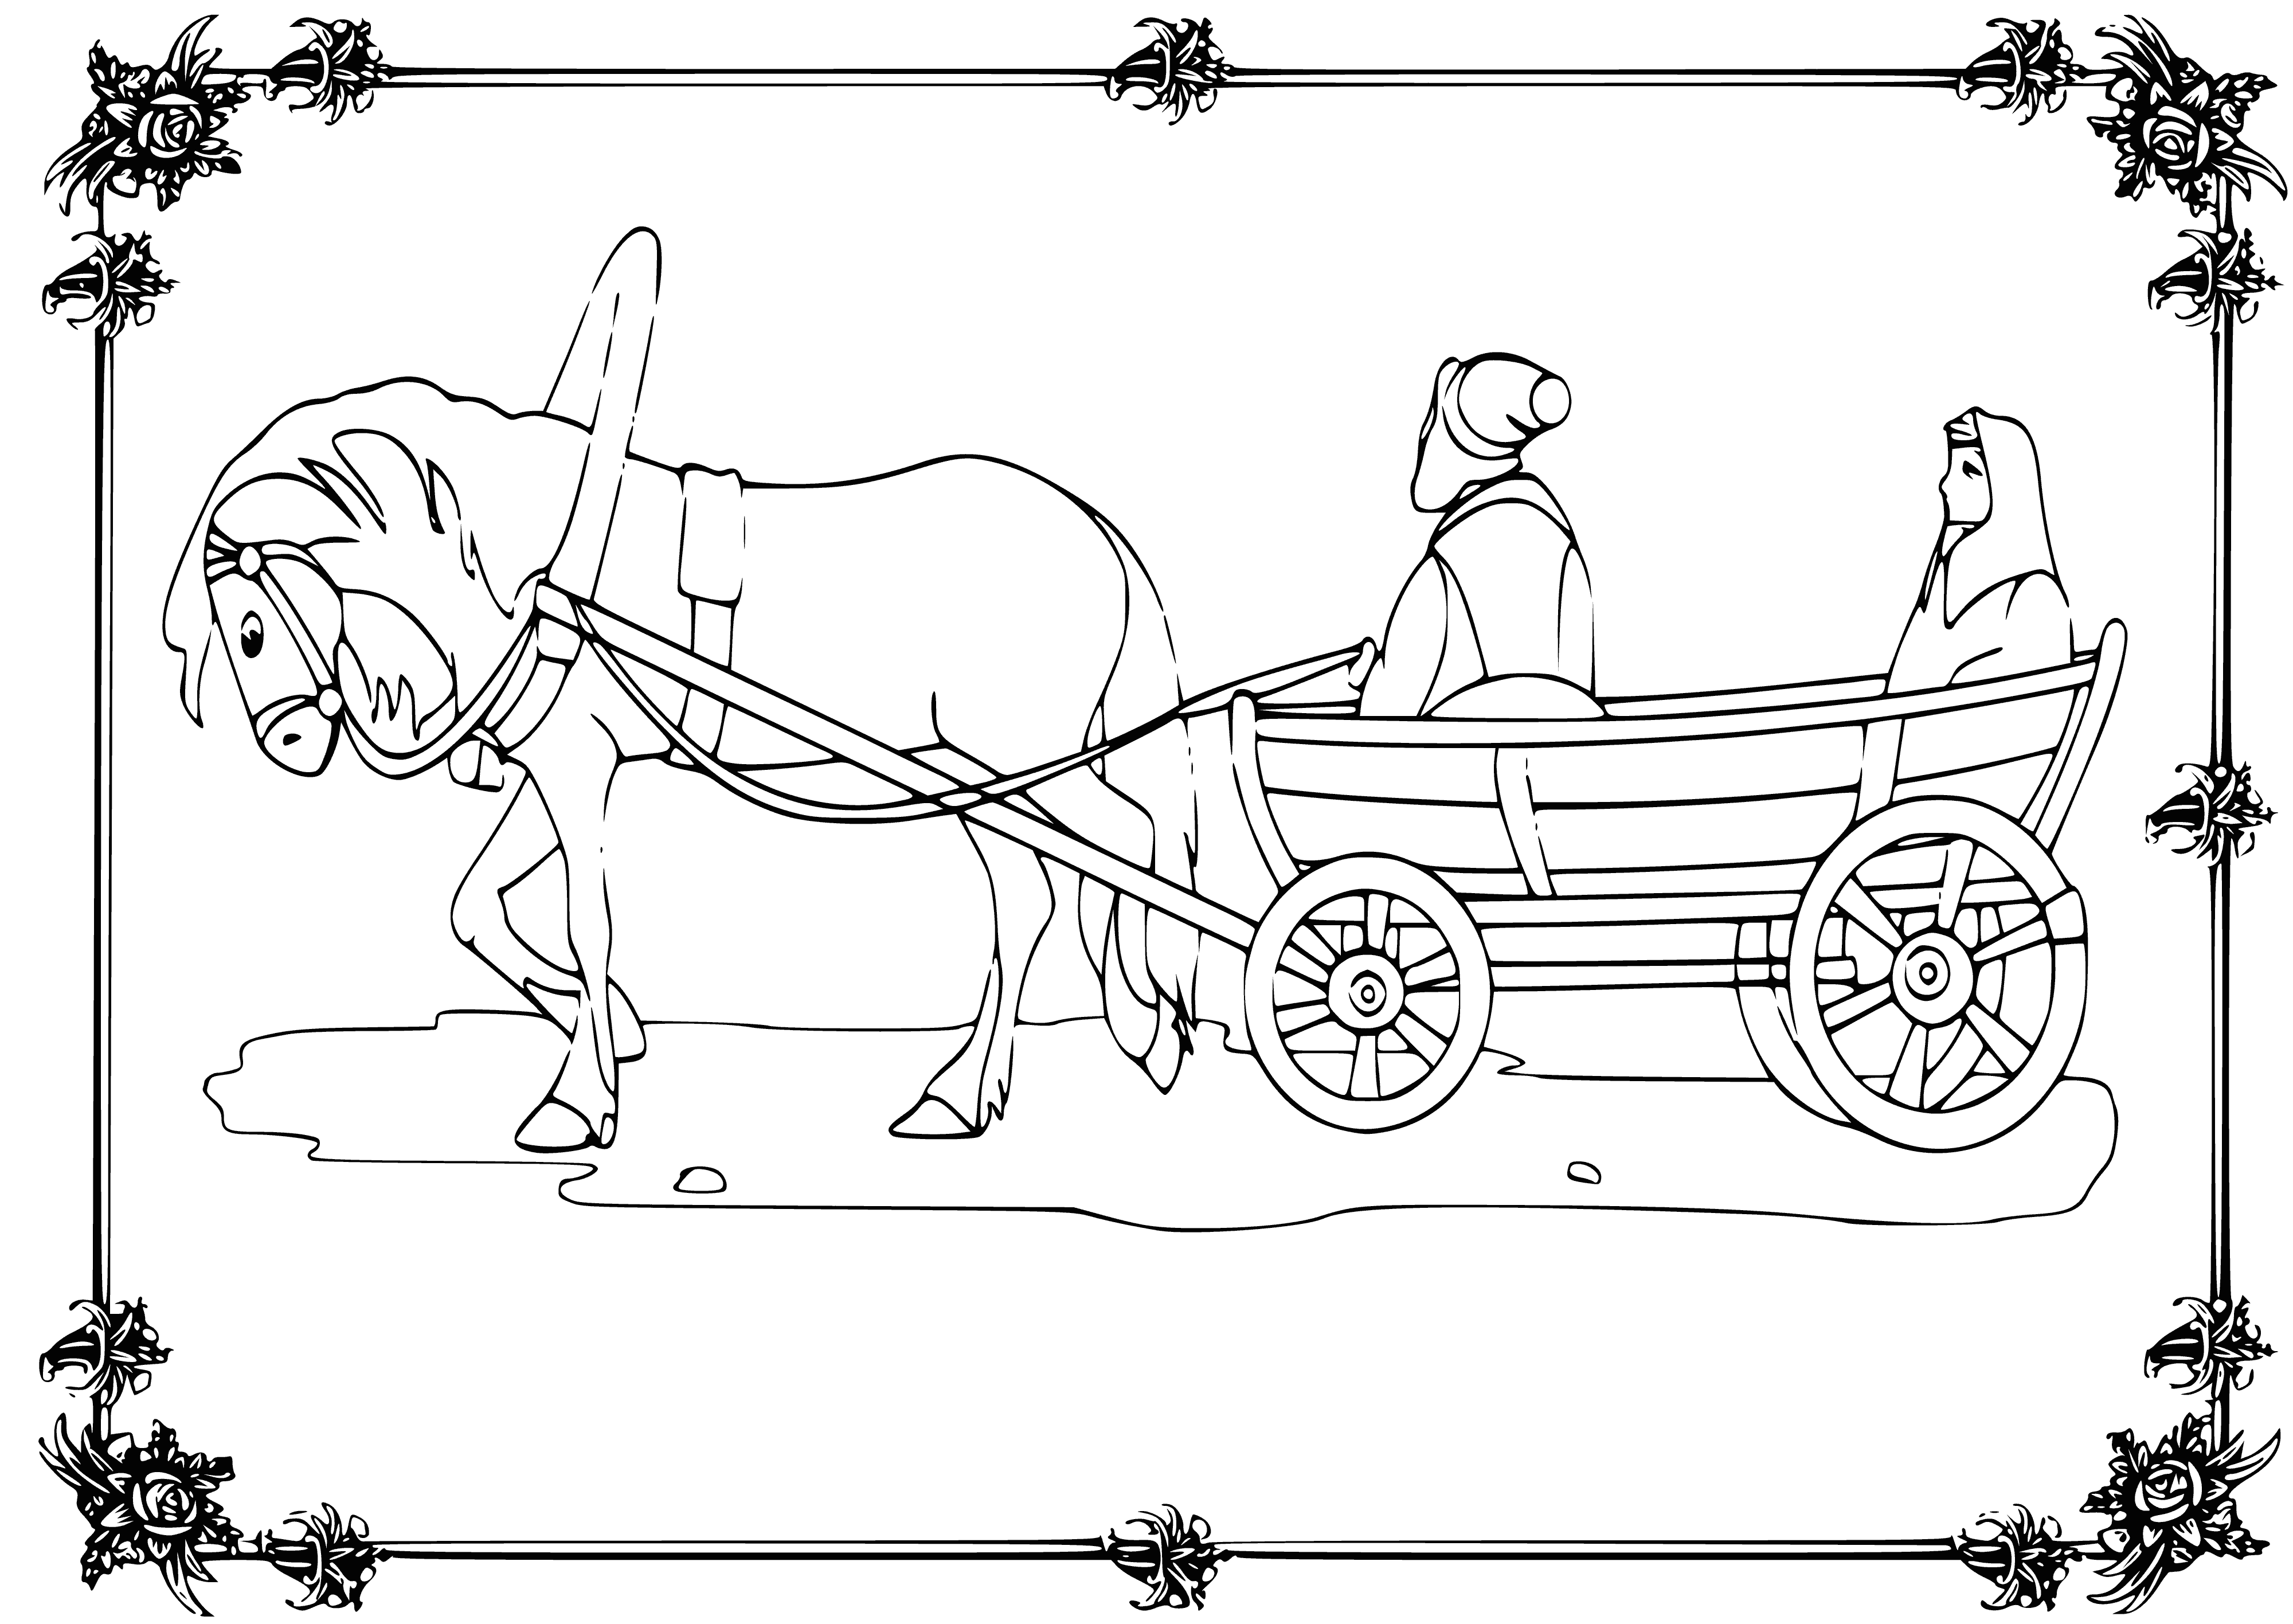 coloring page: Folk tales passed down through generations tell of magical creatures, heroes on adventures, part of Russia's culture and cherished by many.